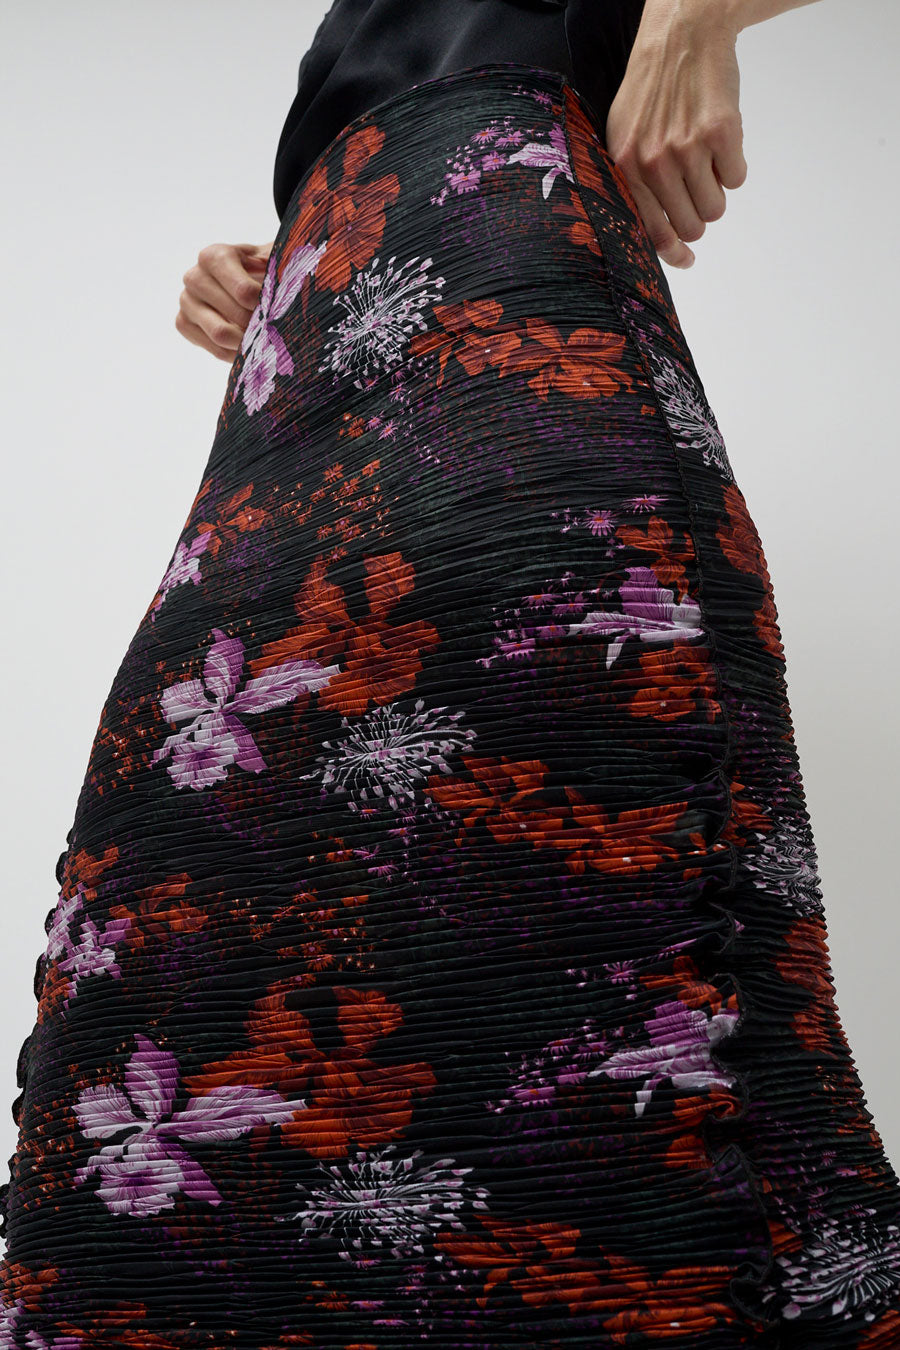 INSHADE Crimped Chiffon Maxi Skirt in Black and Orange Flowers